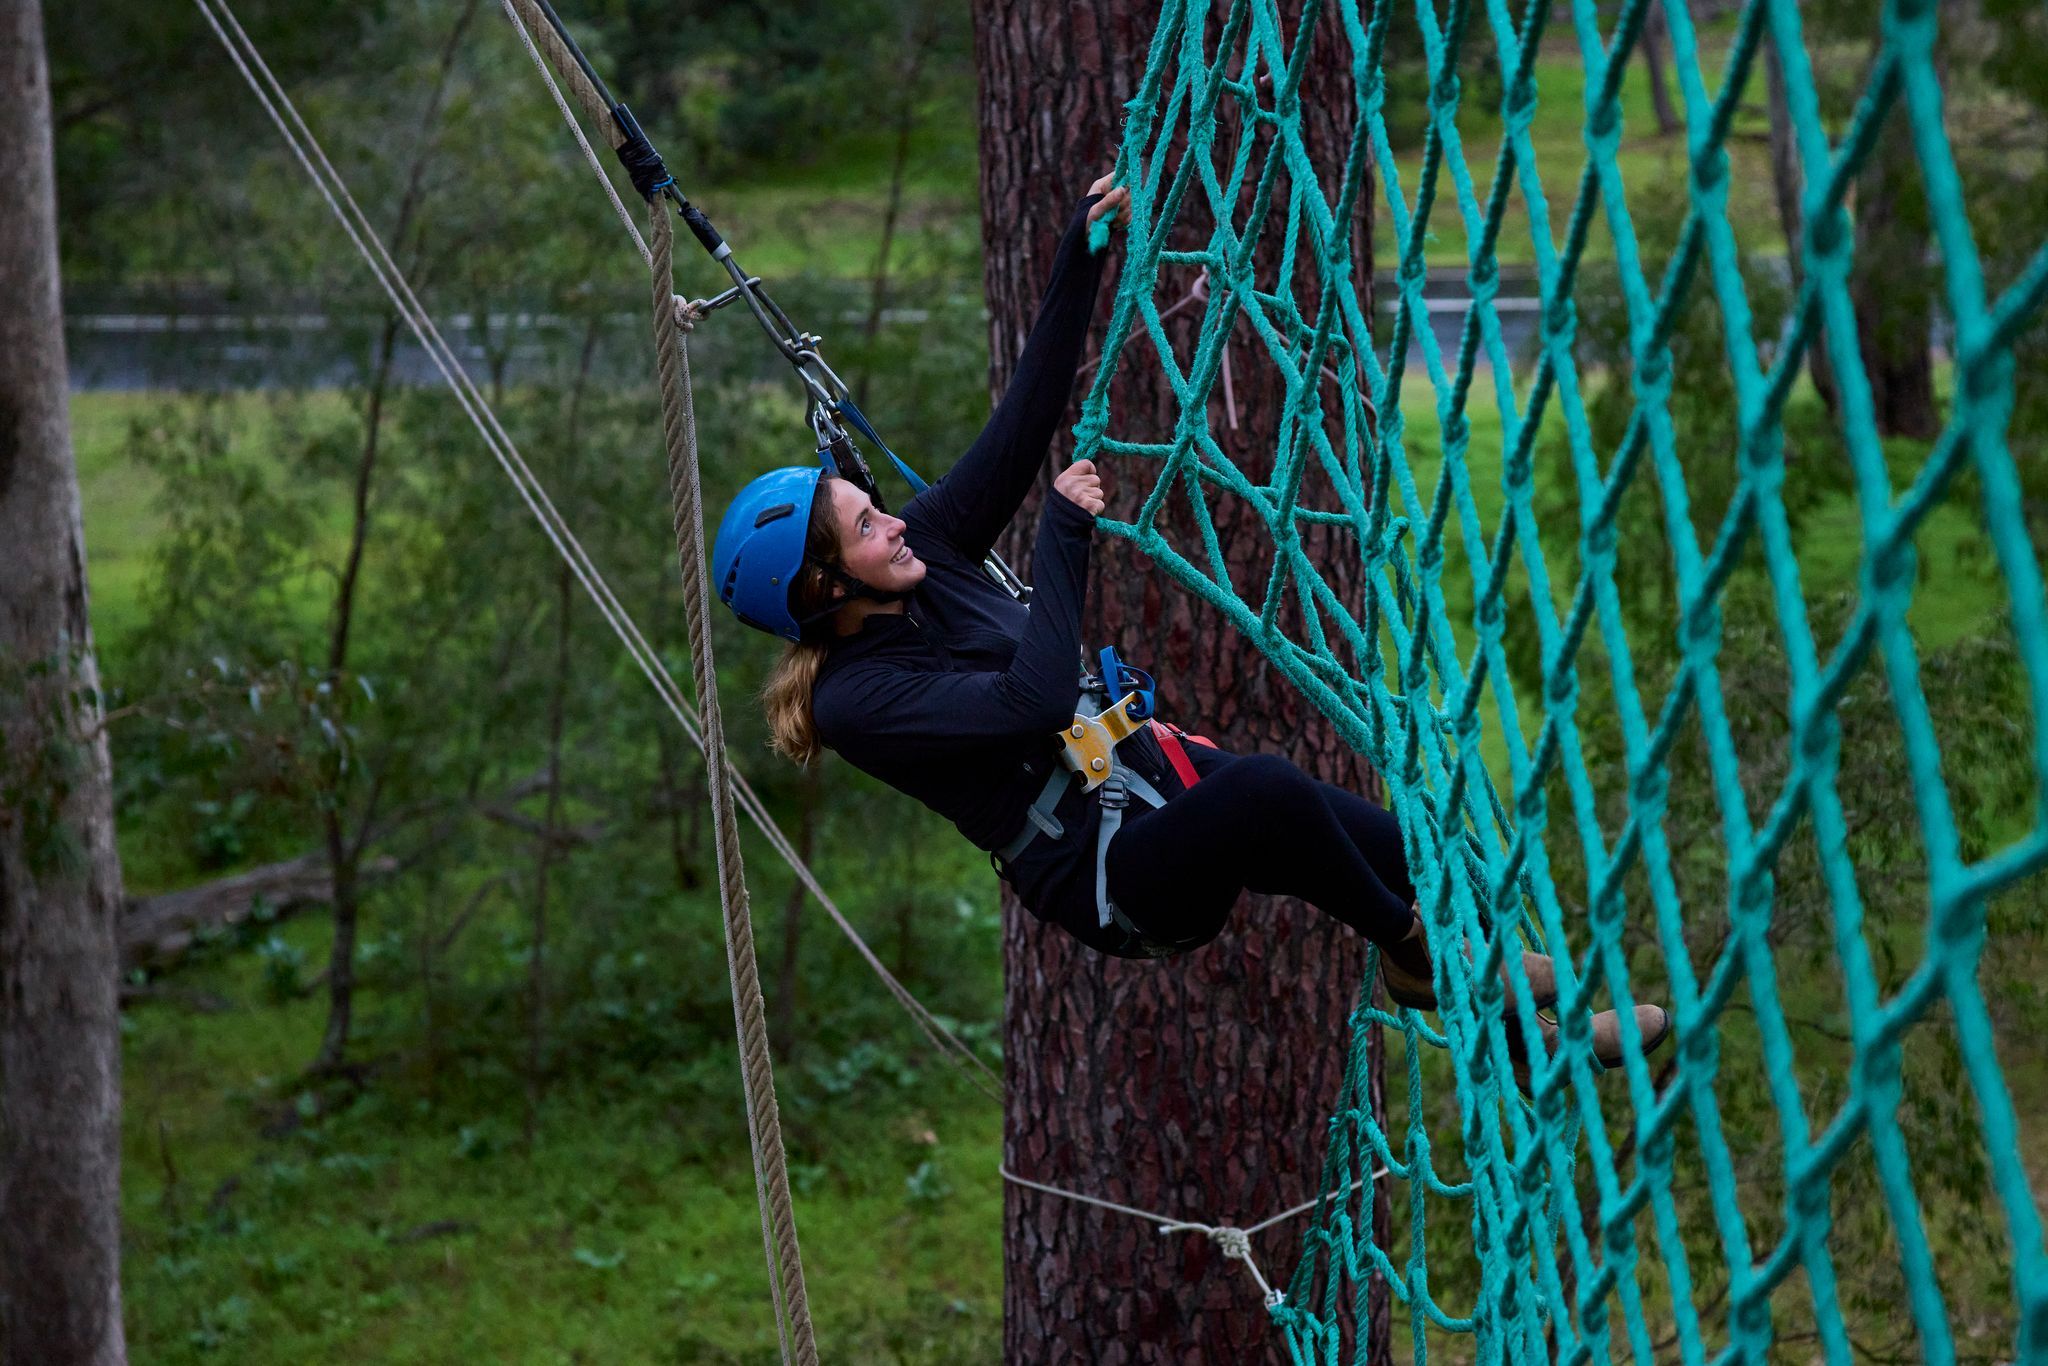 Net Climb at Forest Adventures Busselton. Credit Tim Campbell